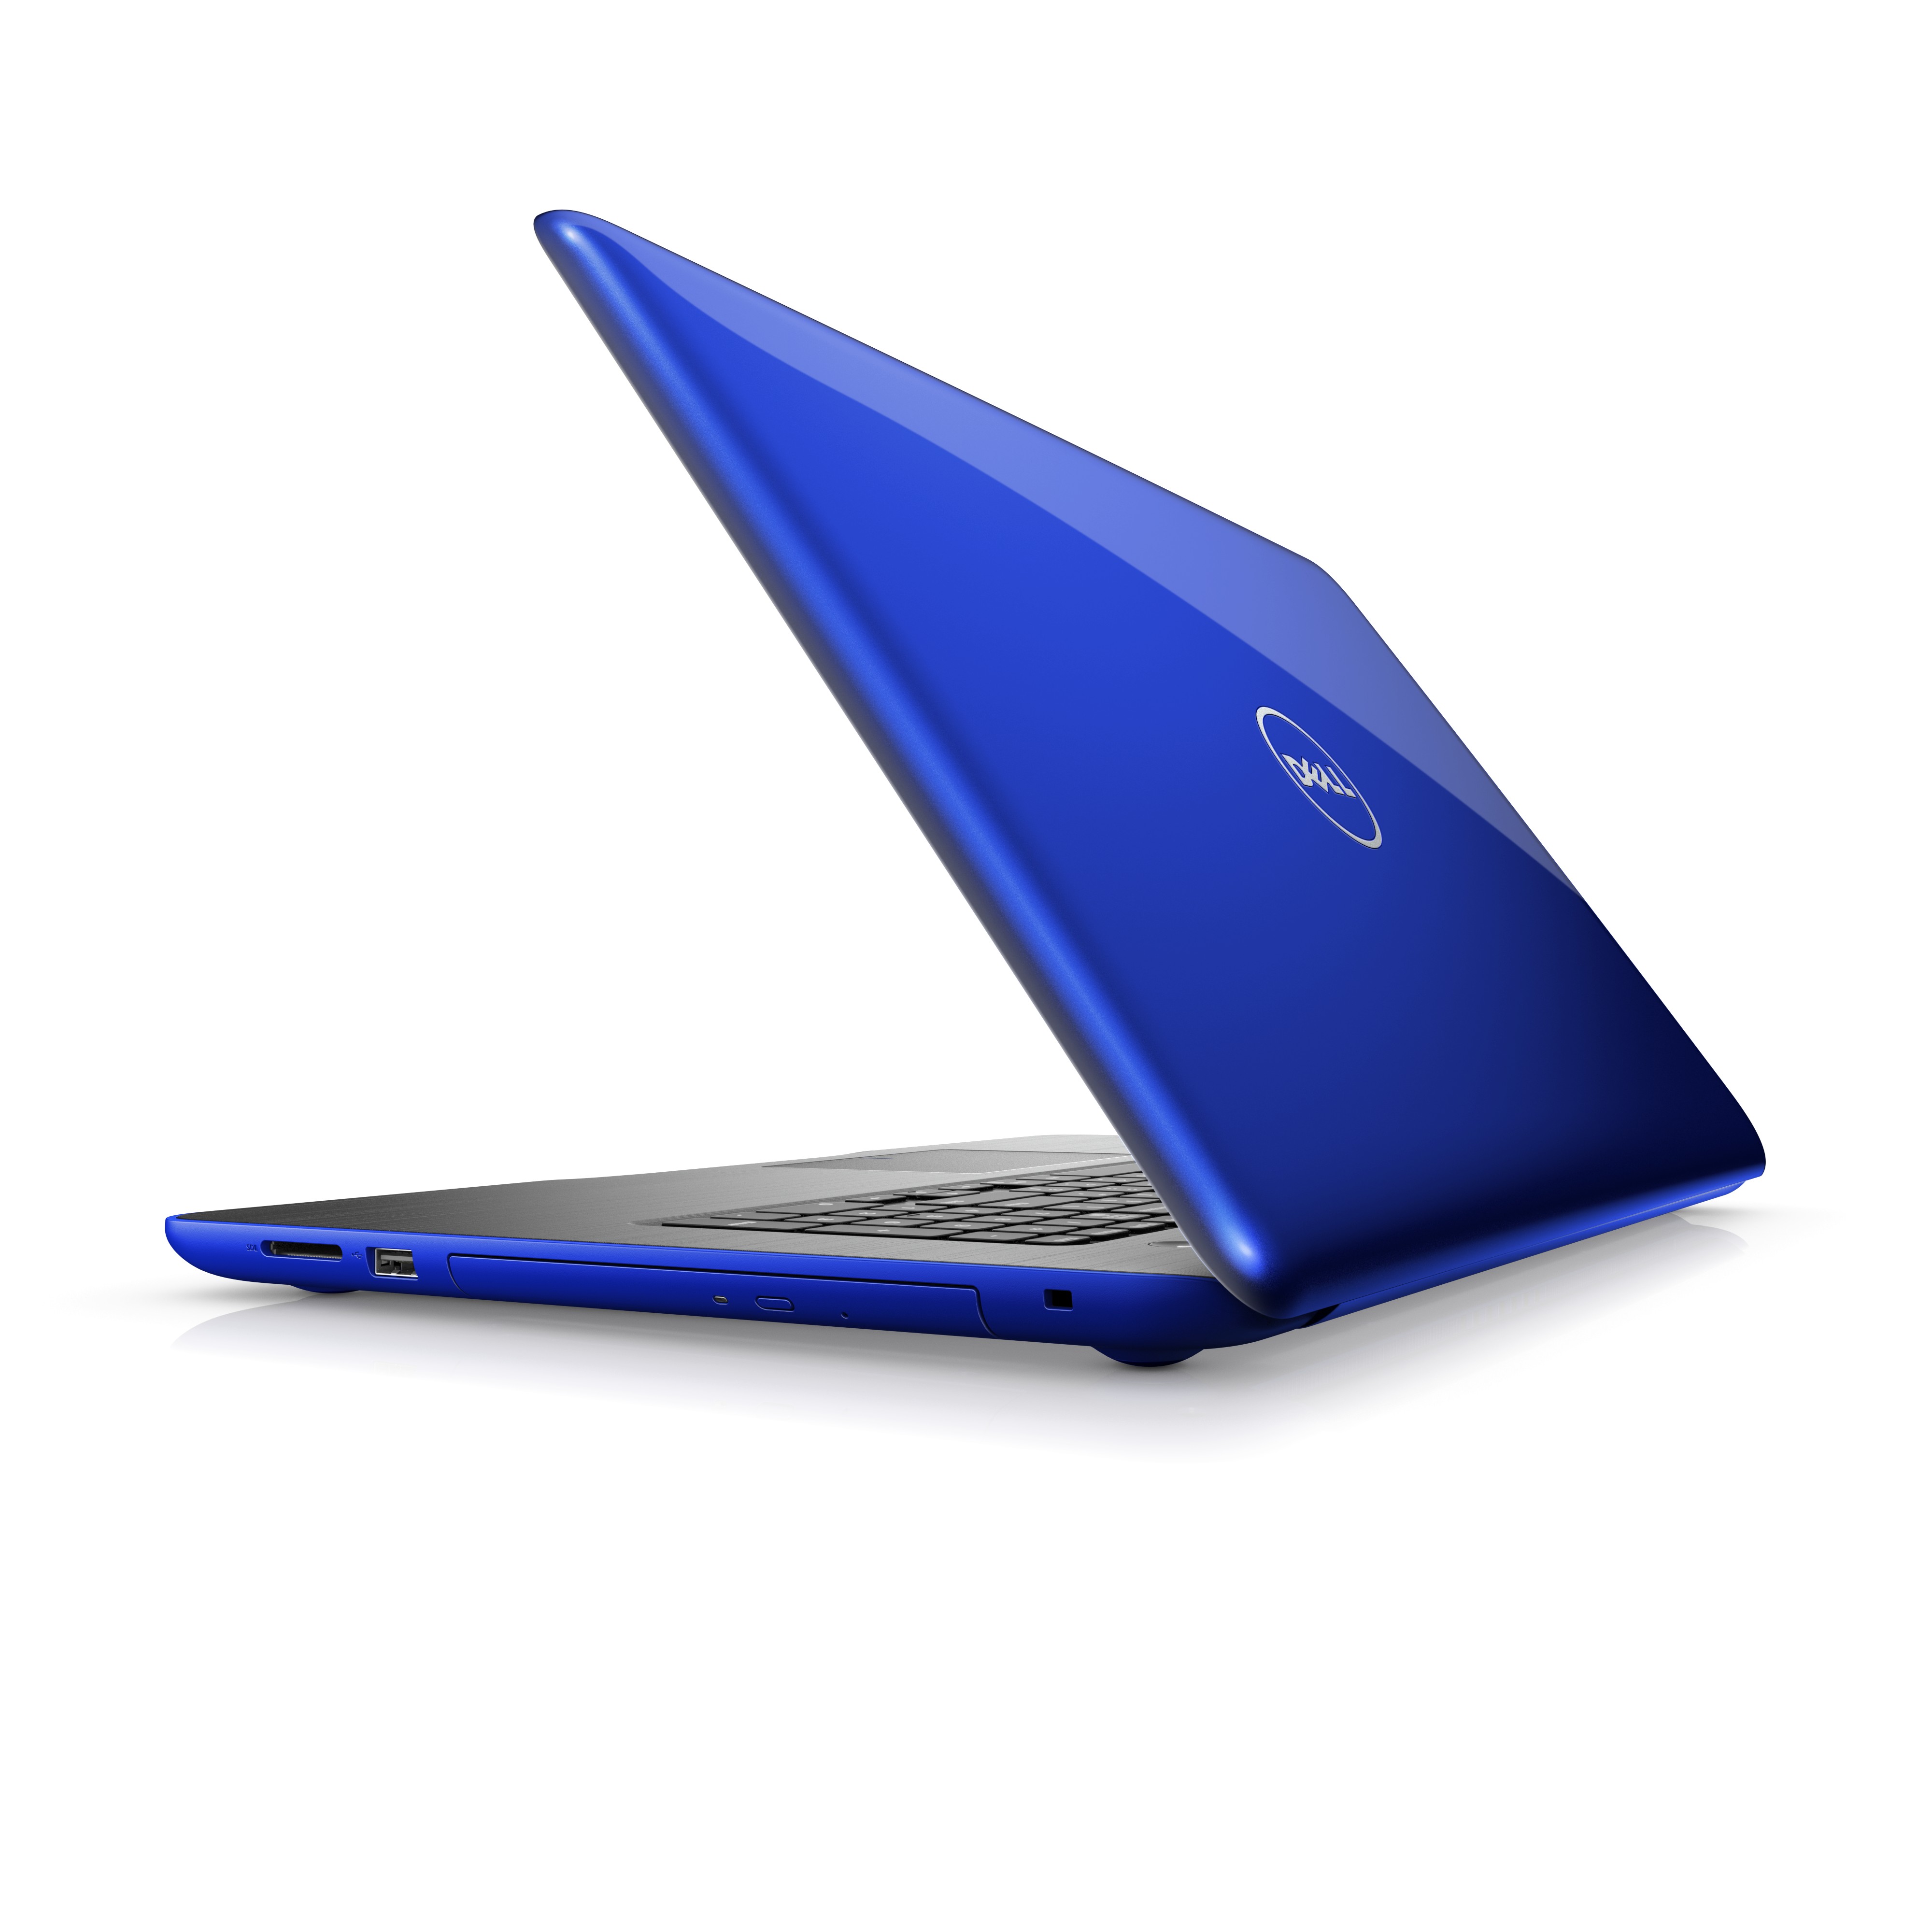 Inspiron 17 5000 Series Non-Touch Notebooks